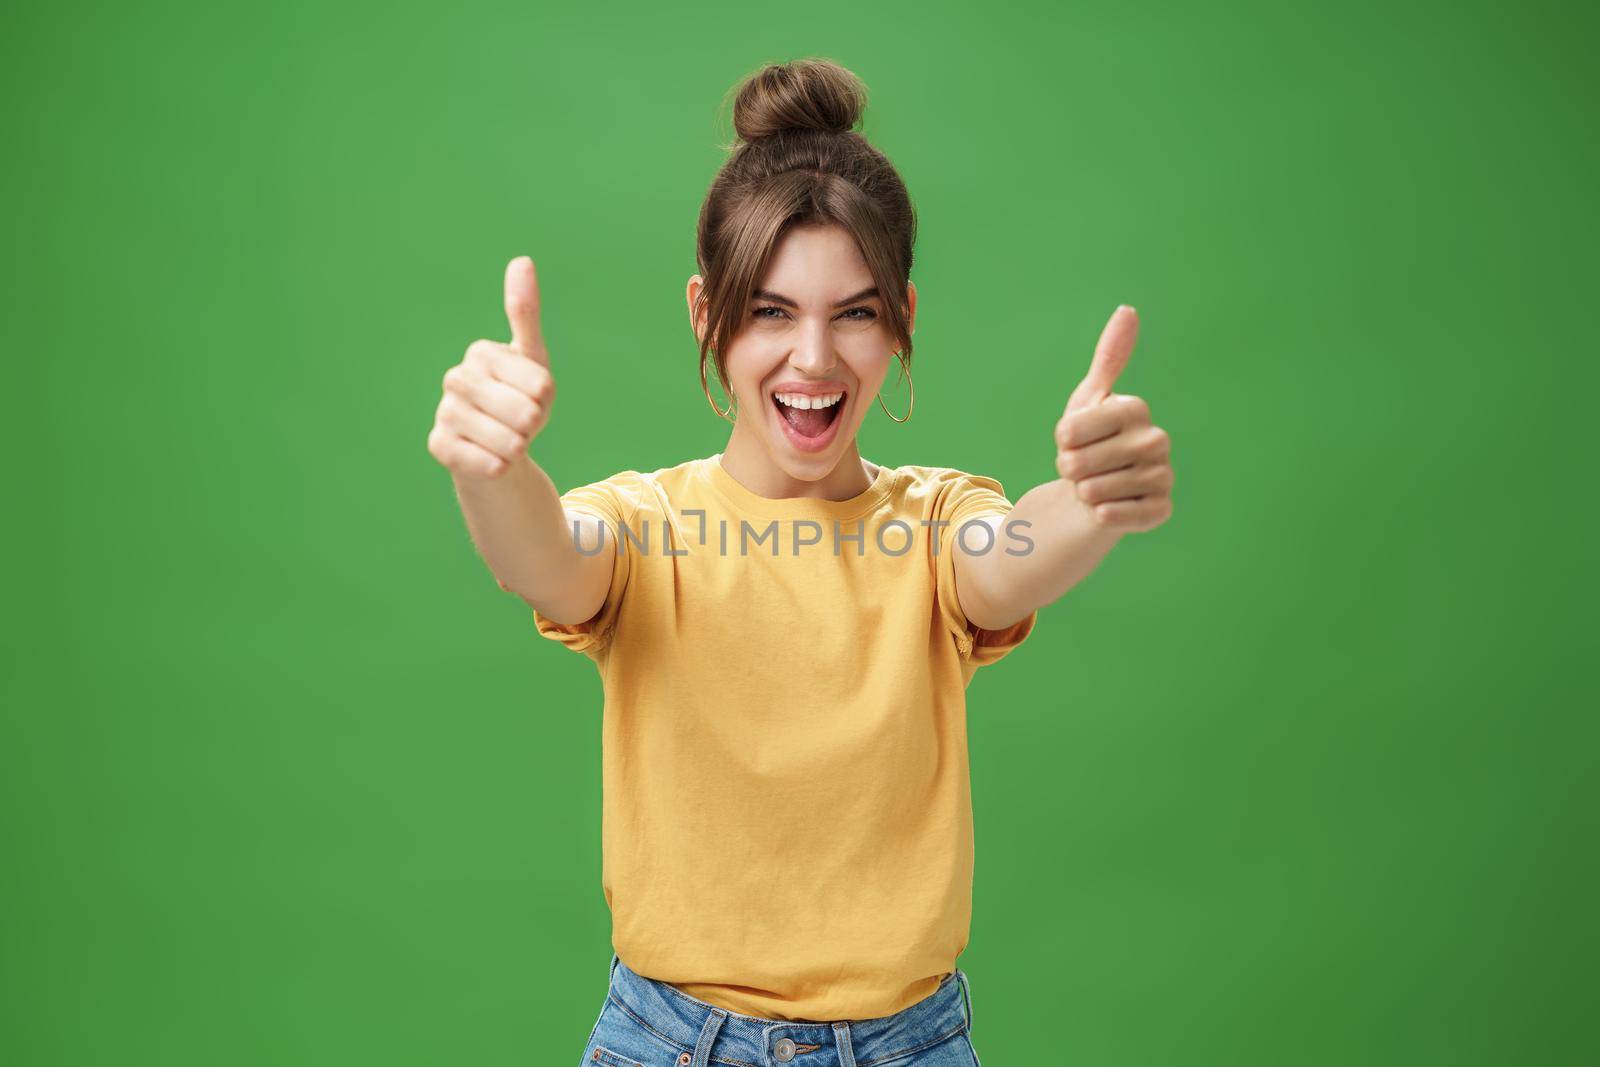 Portrait of cheerful enthusiastic and excited emotive beautiful european woman in yellow t-shirt pulling hands with thumbs up towards camera smiling broadly, being supportive, liking idea. Body language concept